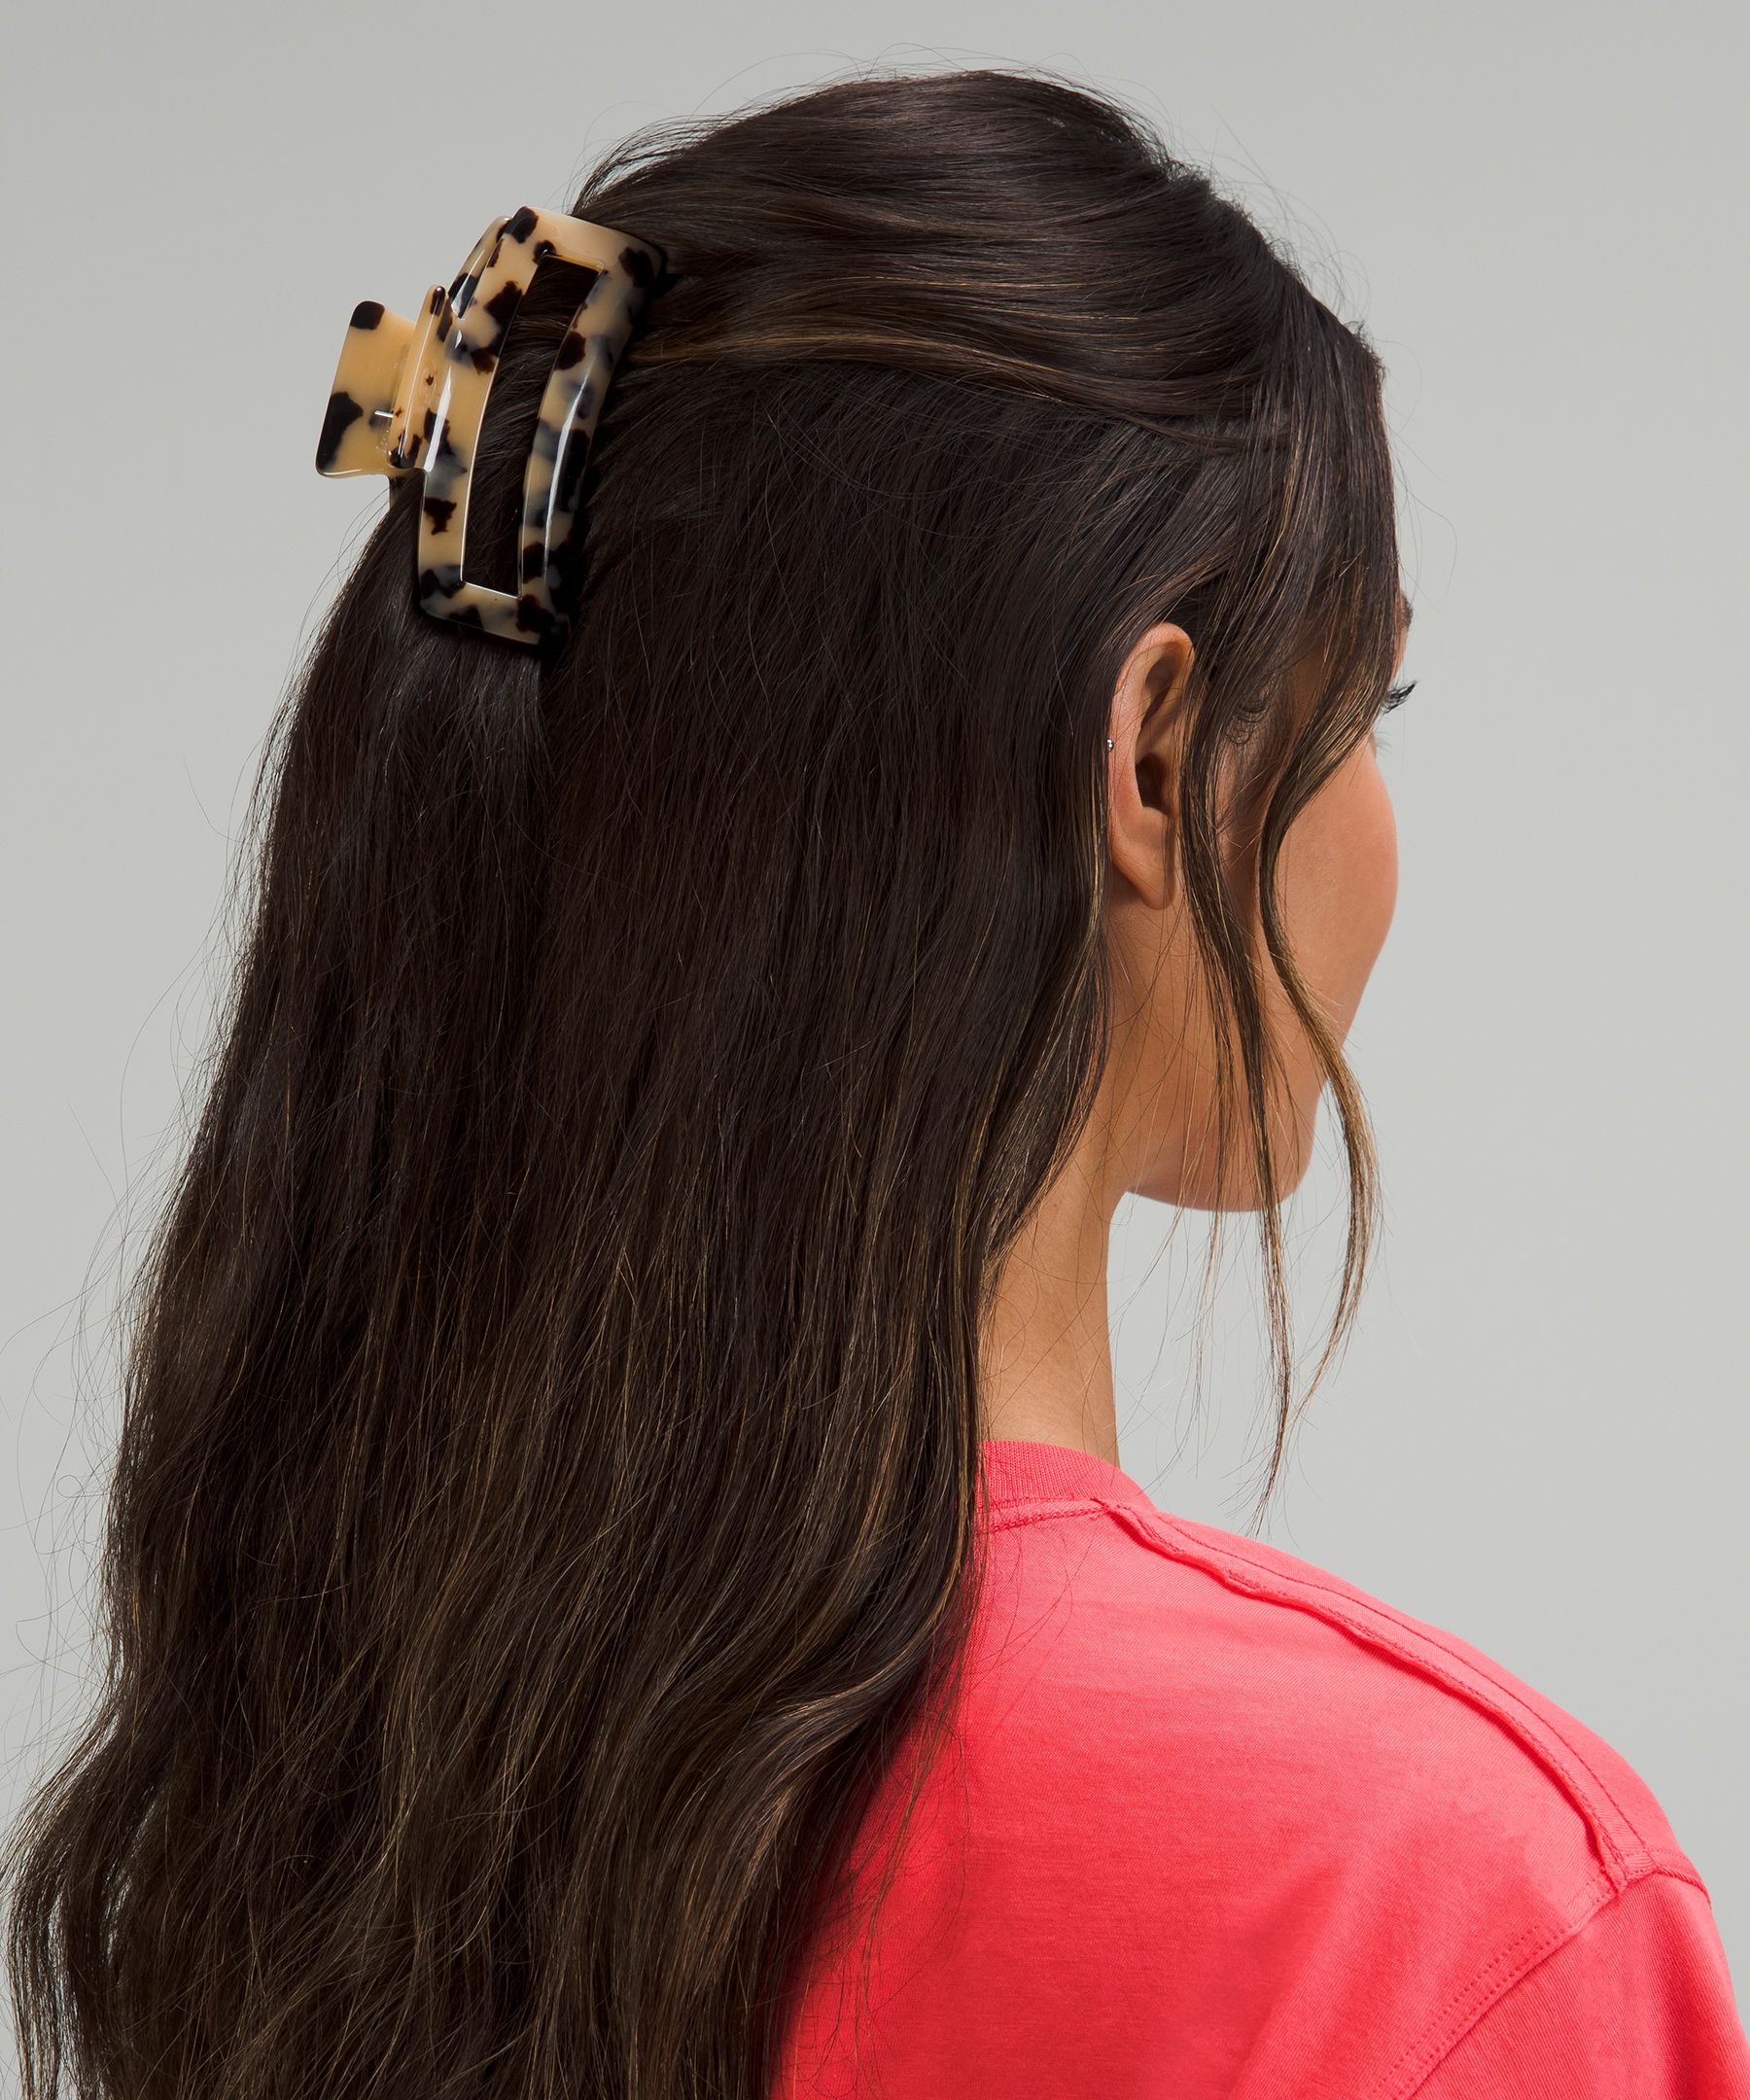 Large Claw Hair Clip | Women's Accessories | lululemon